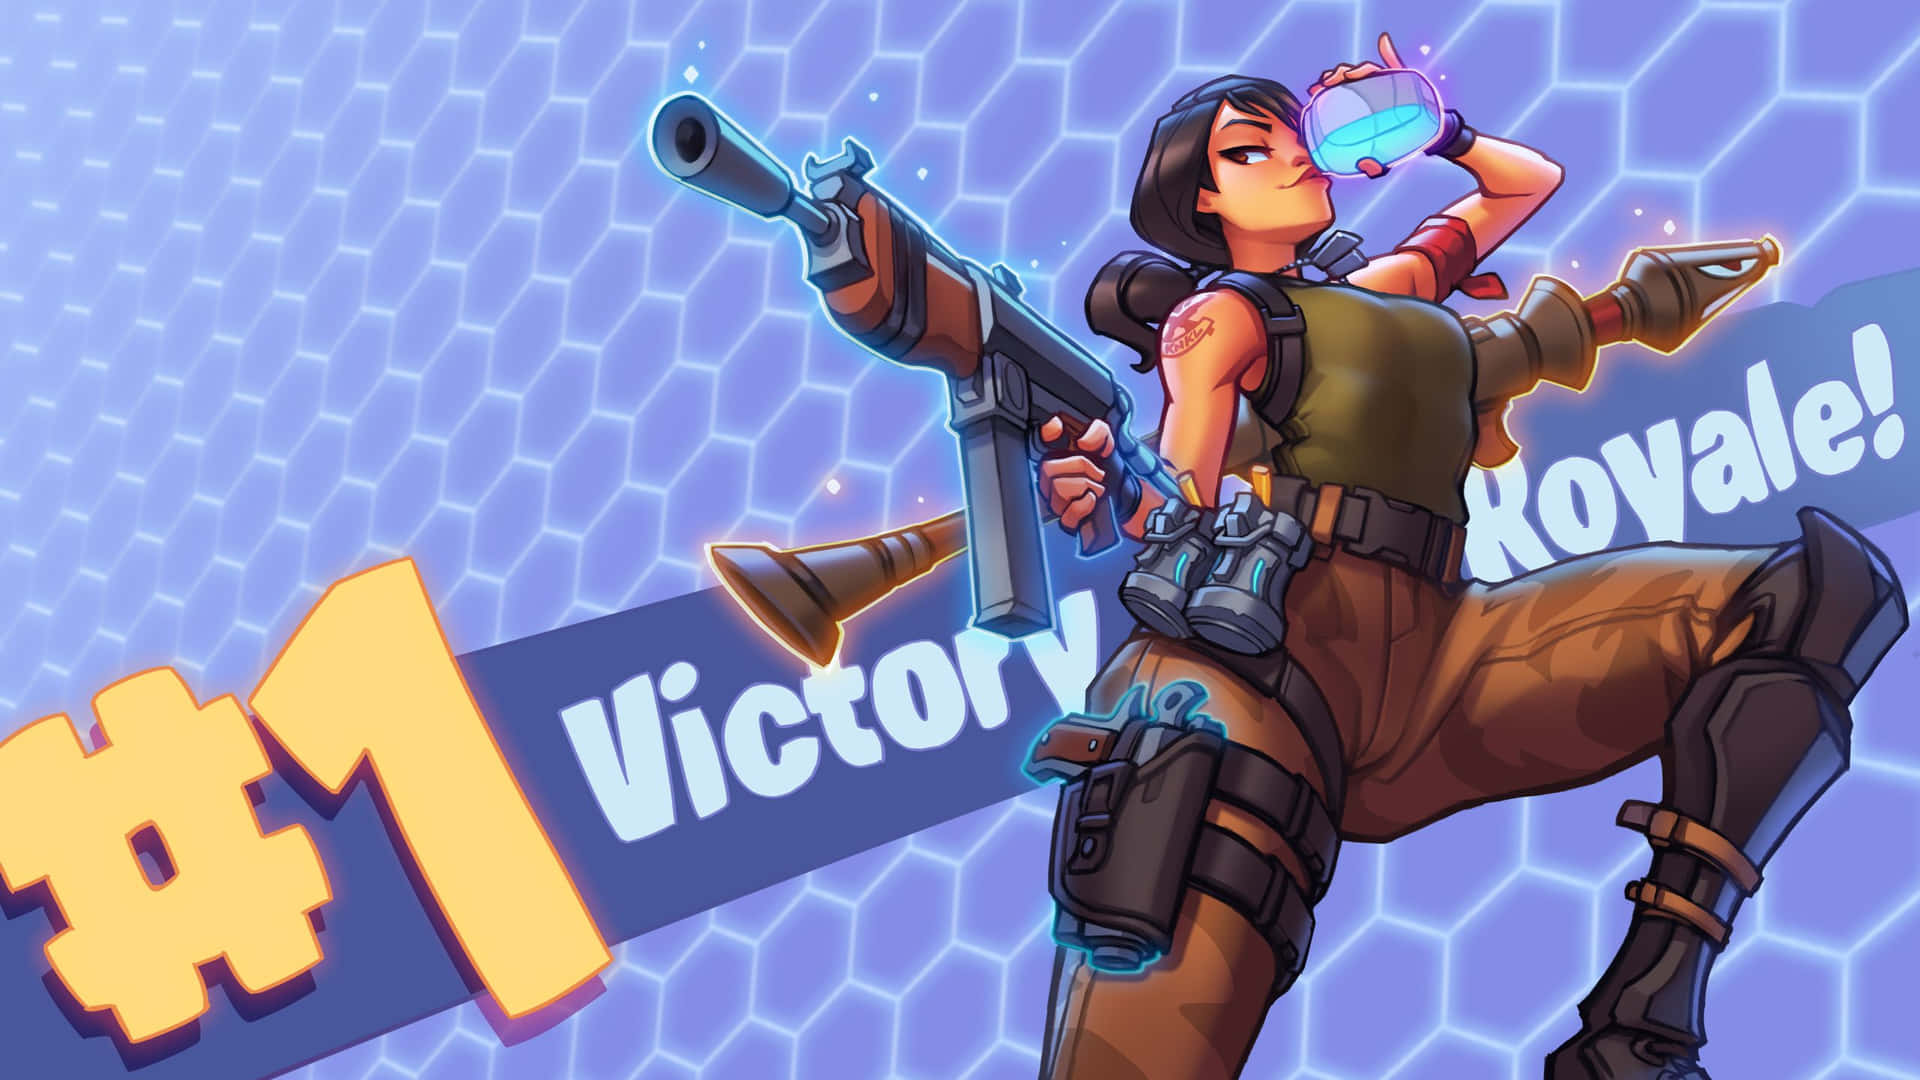 Be a Wildcat and take Fortnite to the next level Wallpaper